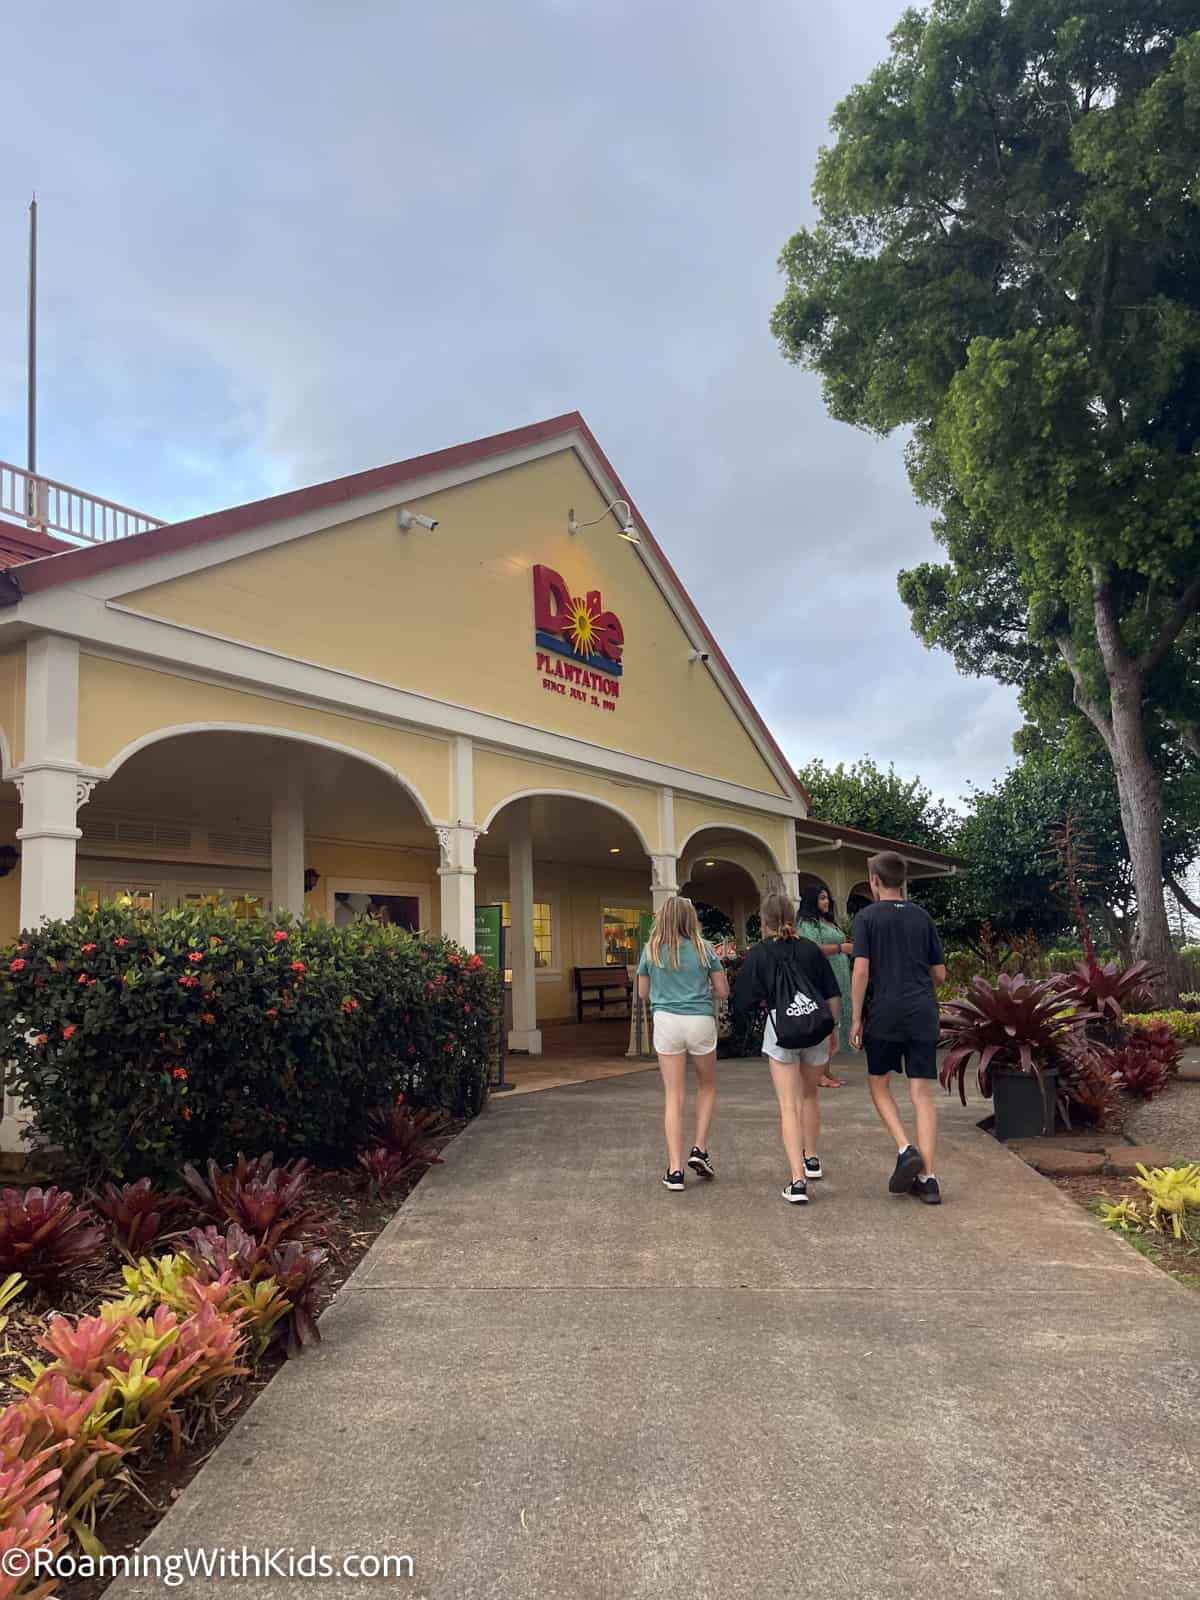 Visiting the Dole Plantation in Hawaii